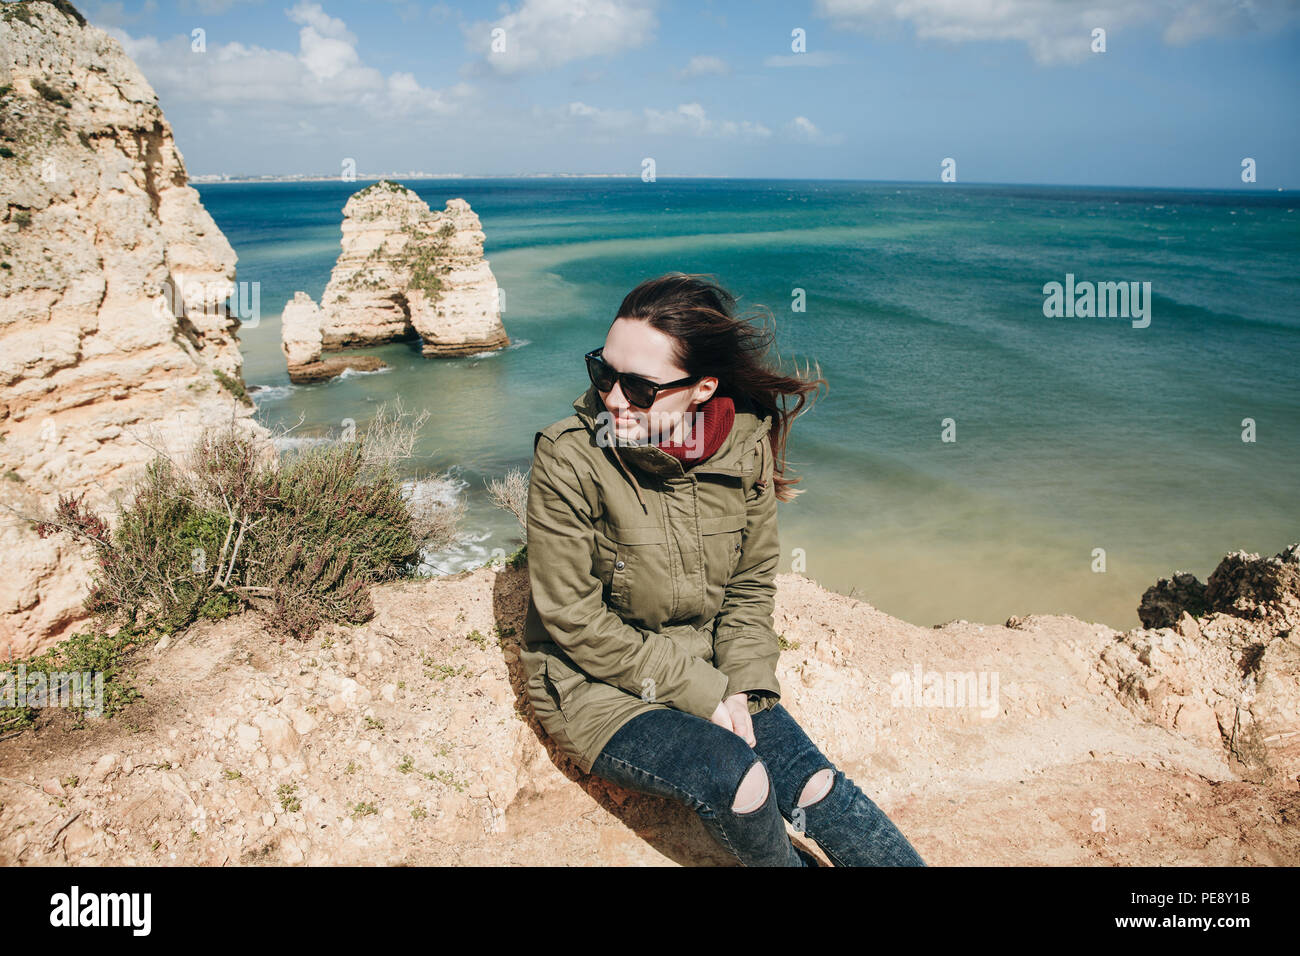 A young woman tourist enjoys the beautiful views of the Atlantic Ocean and the landscape off the coast in Portugal. Stock Photo